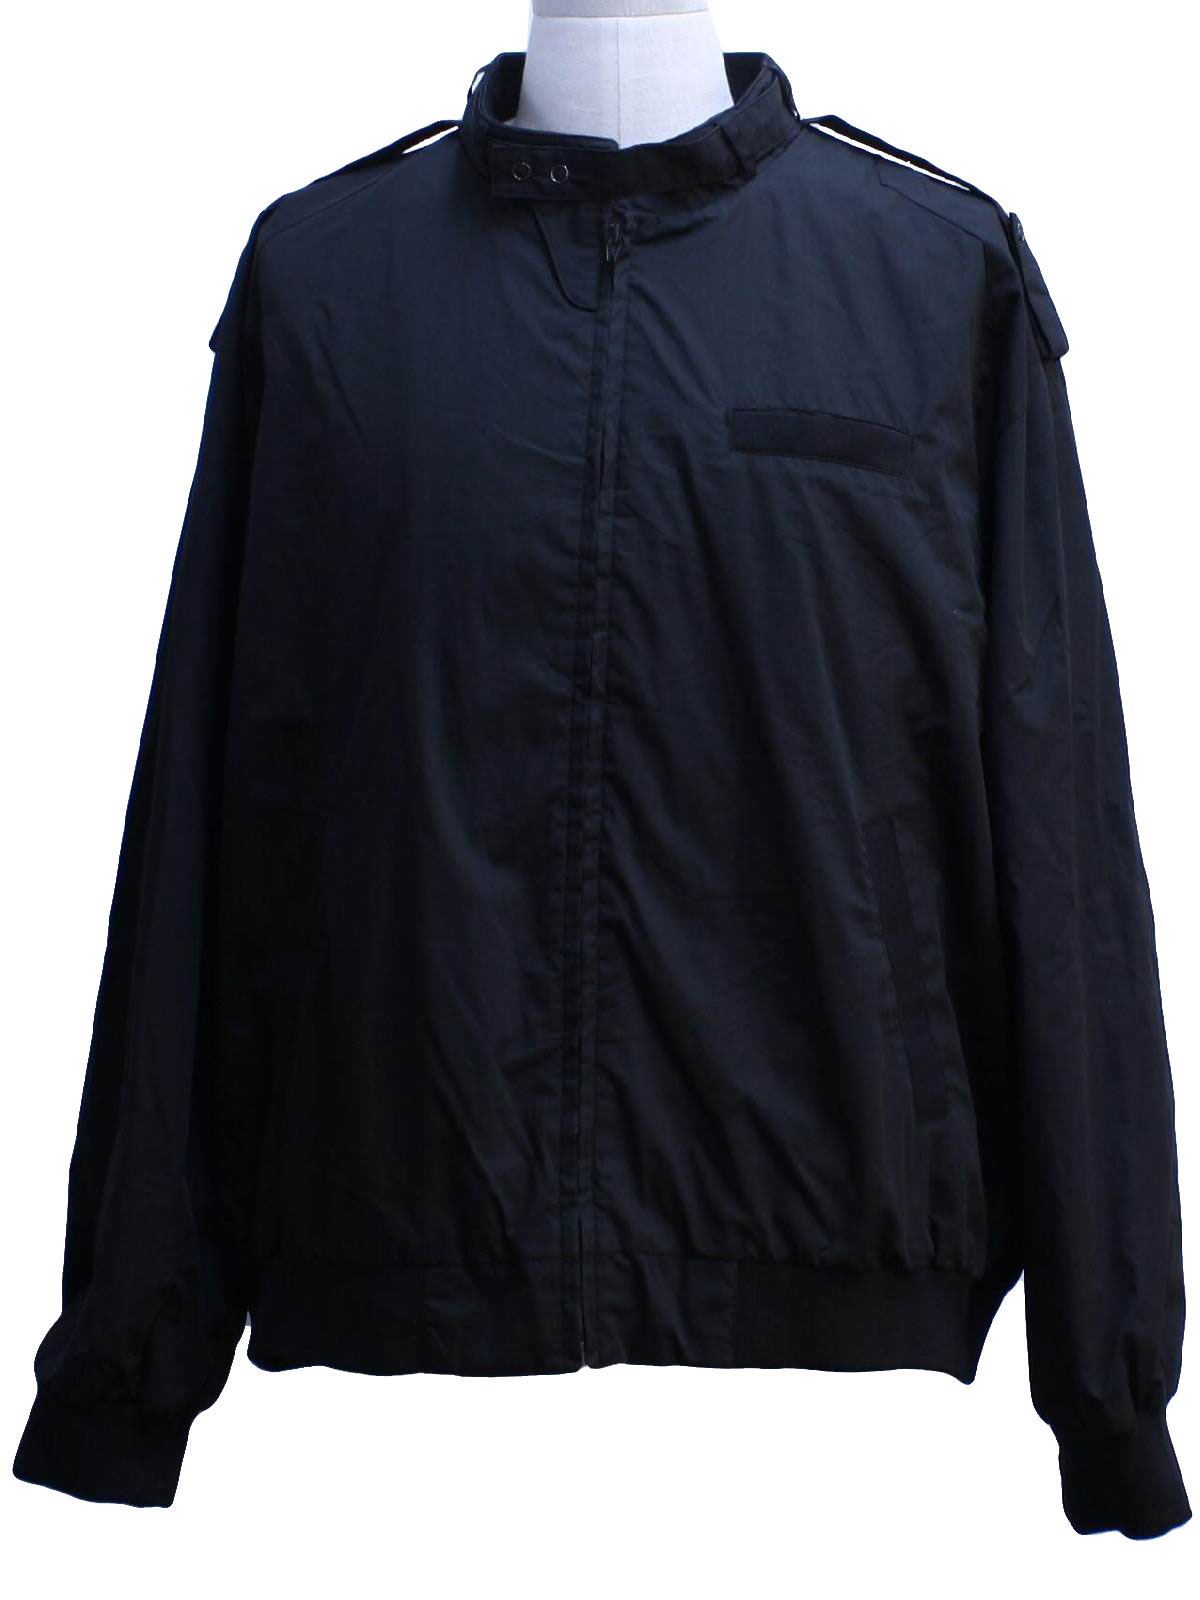 1980s Towncraft Jacket: 80s -Towncraft- Mens black cotton polyester ...